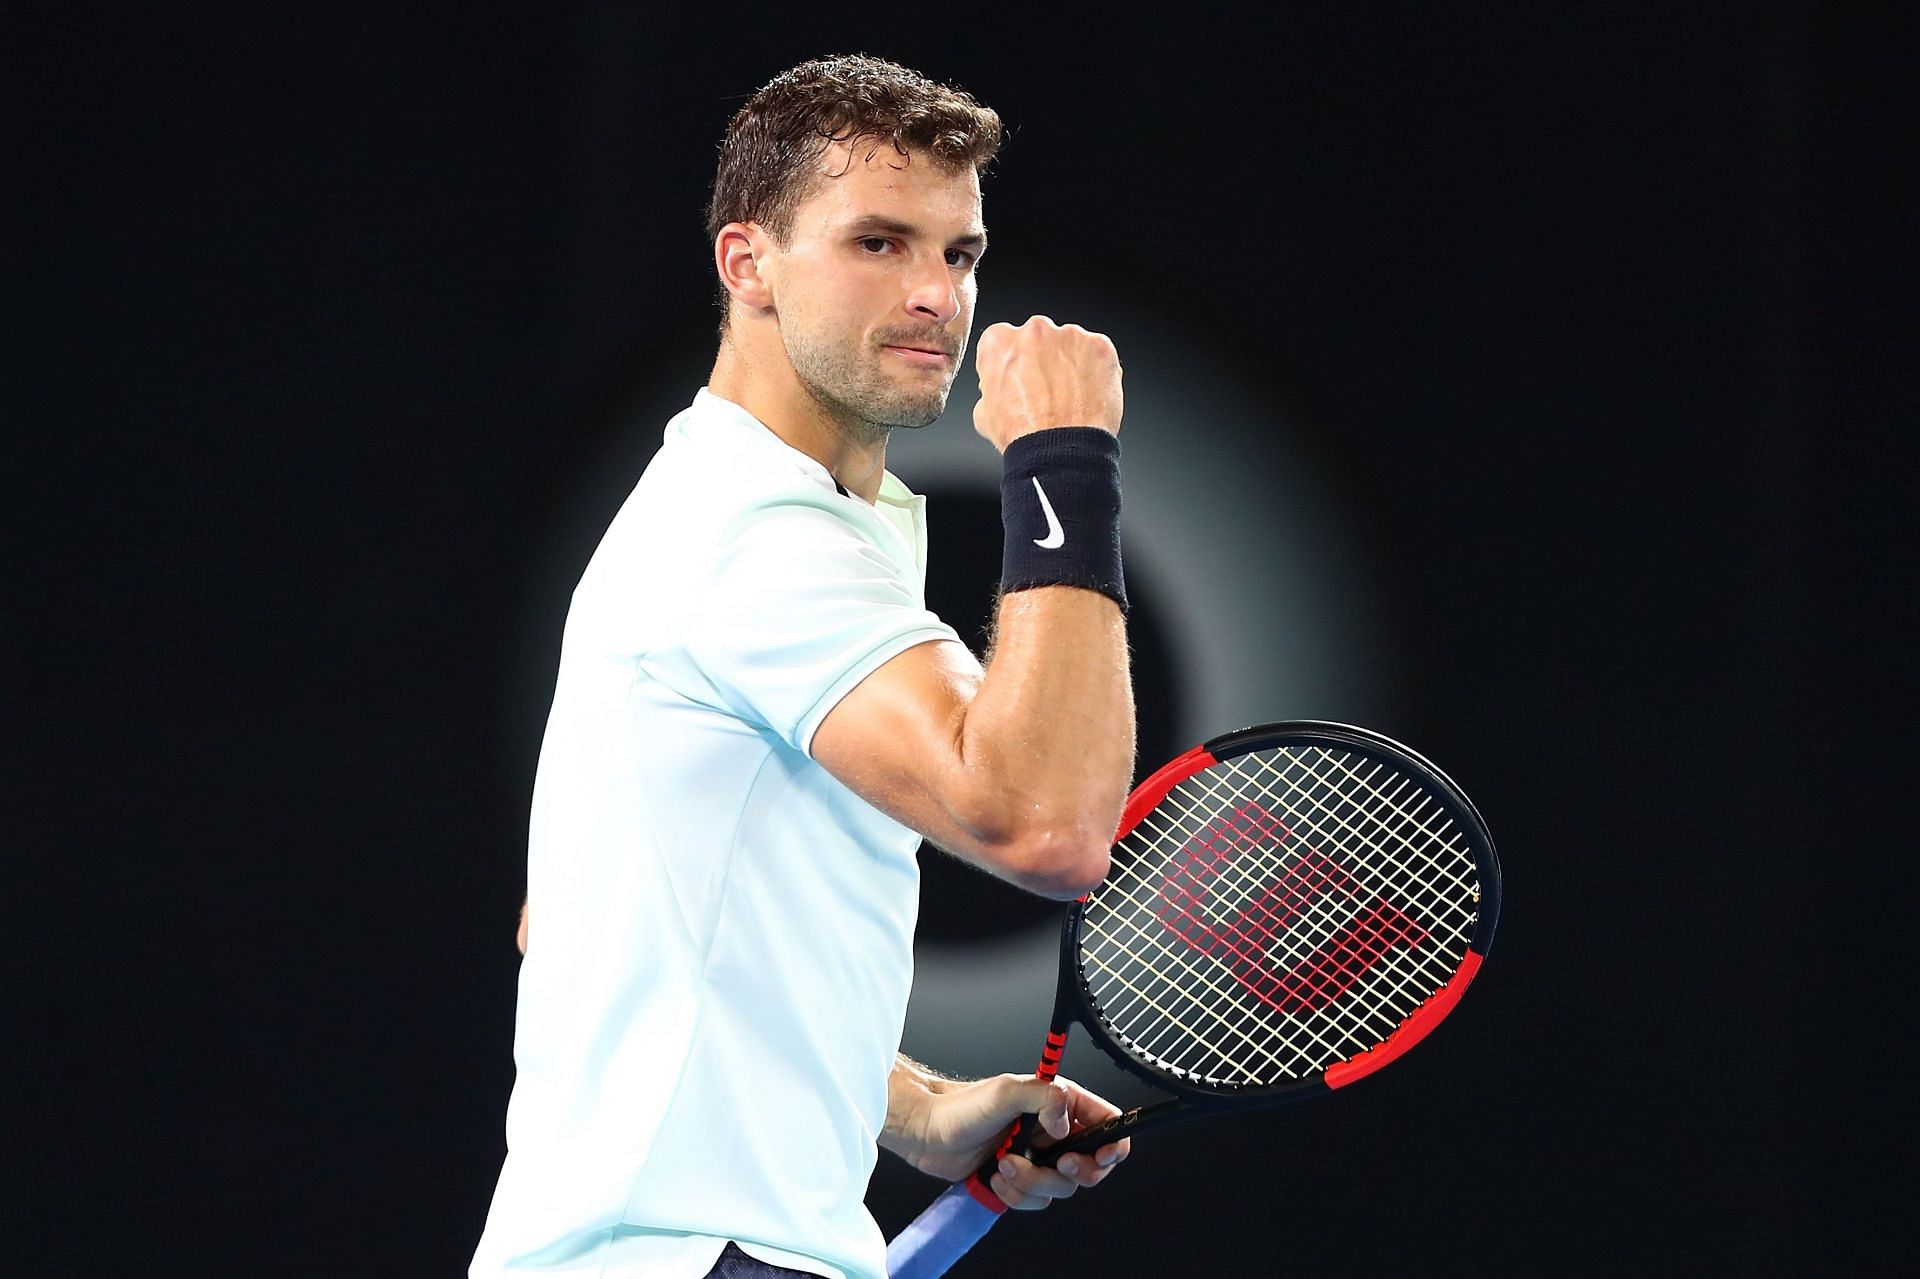 Grigor Dimitrov can play many years says his coach